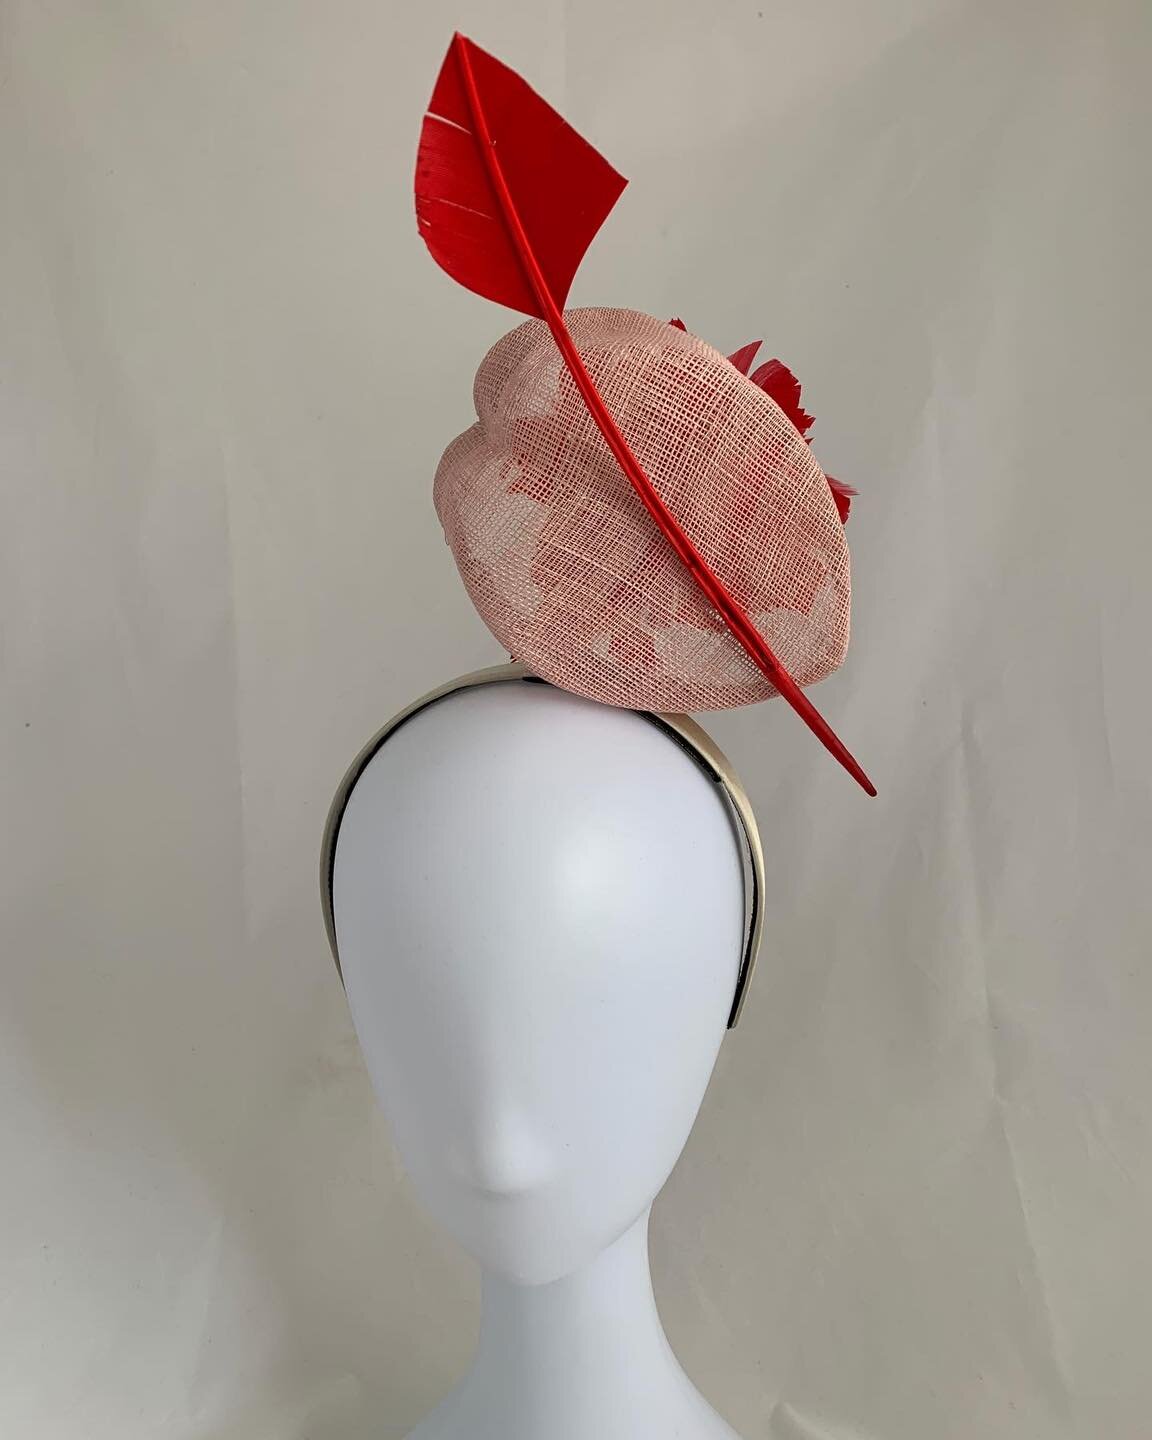 Happy Valentine&rsquo;s Day, Galentines Day, or just plain old Happy Wednesday to all the hat lovers that follow me in my adventures in millinery. 

Love you all

Susie x